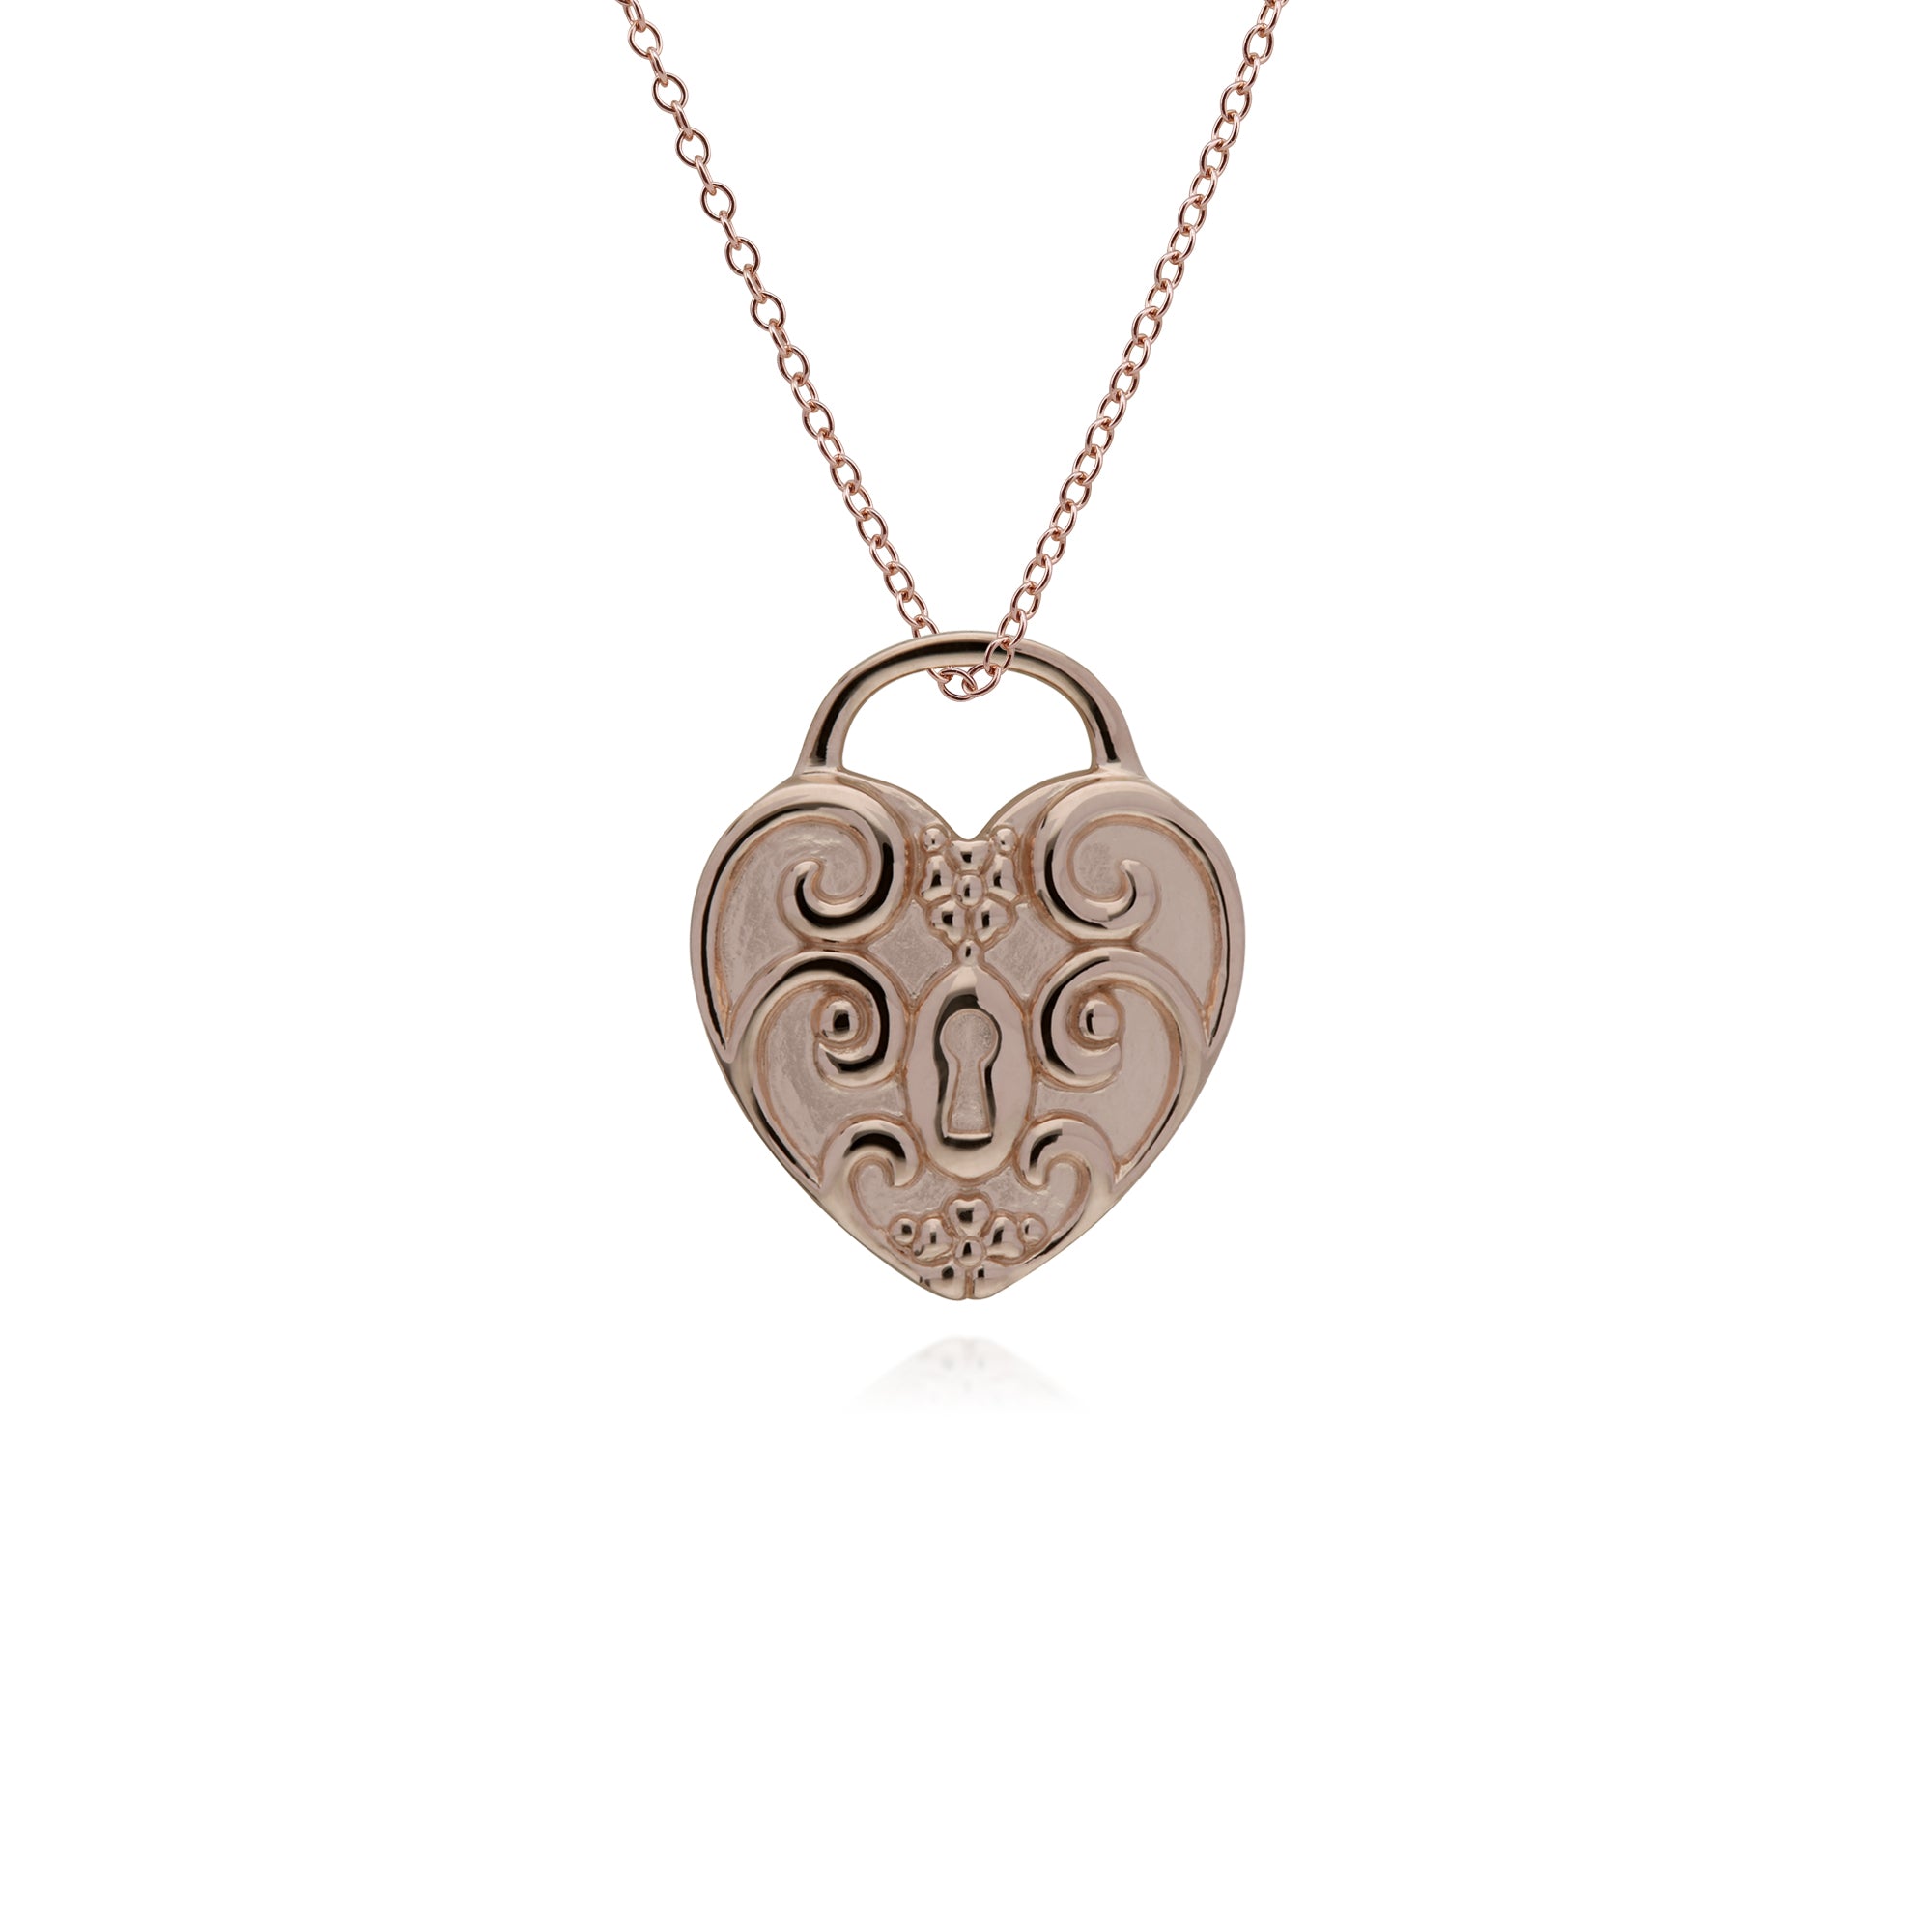 270P025902925-270P026501925 Classic Heart Lock Pendant & Rainbow Moonstone Charm in Rose Gold Plated 925 Sterling Silver 3